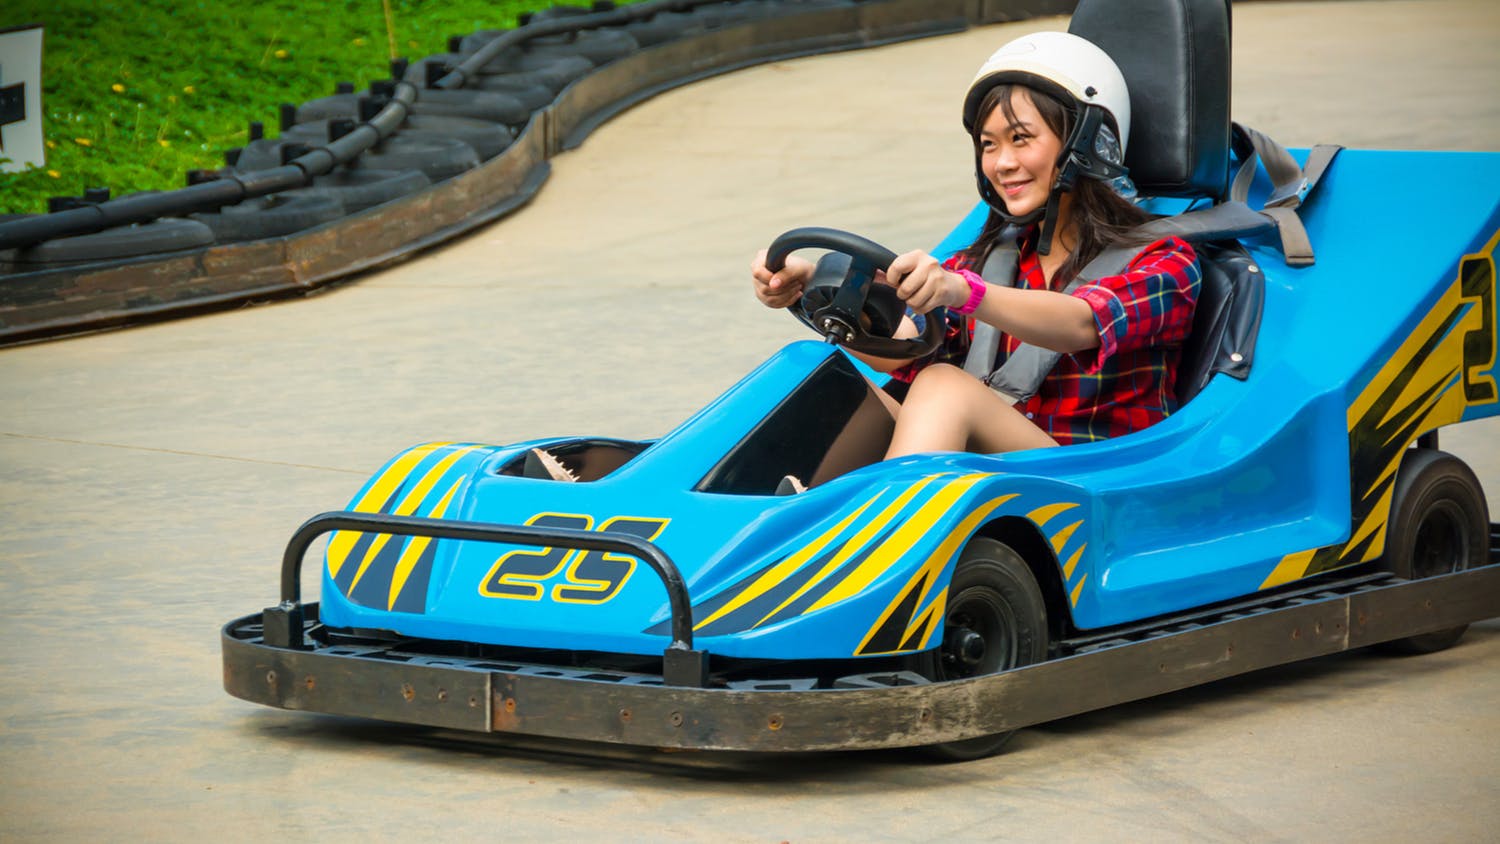 Can You Go Kart While Pregnant? 